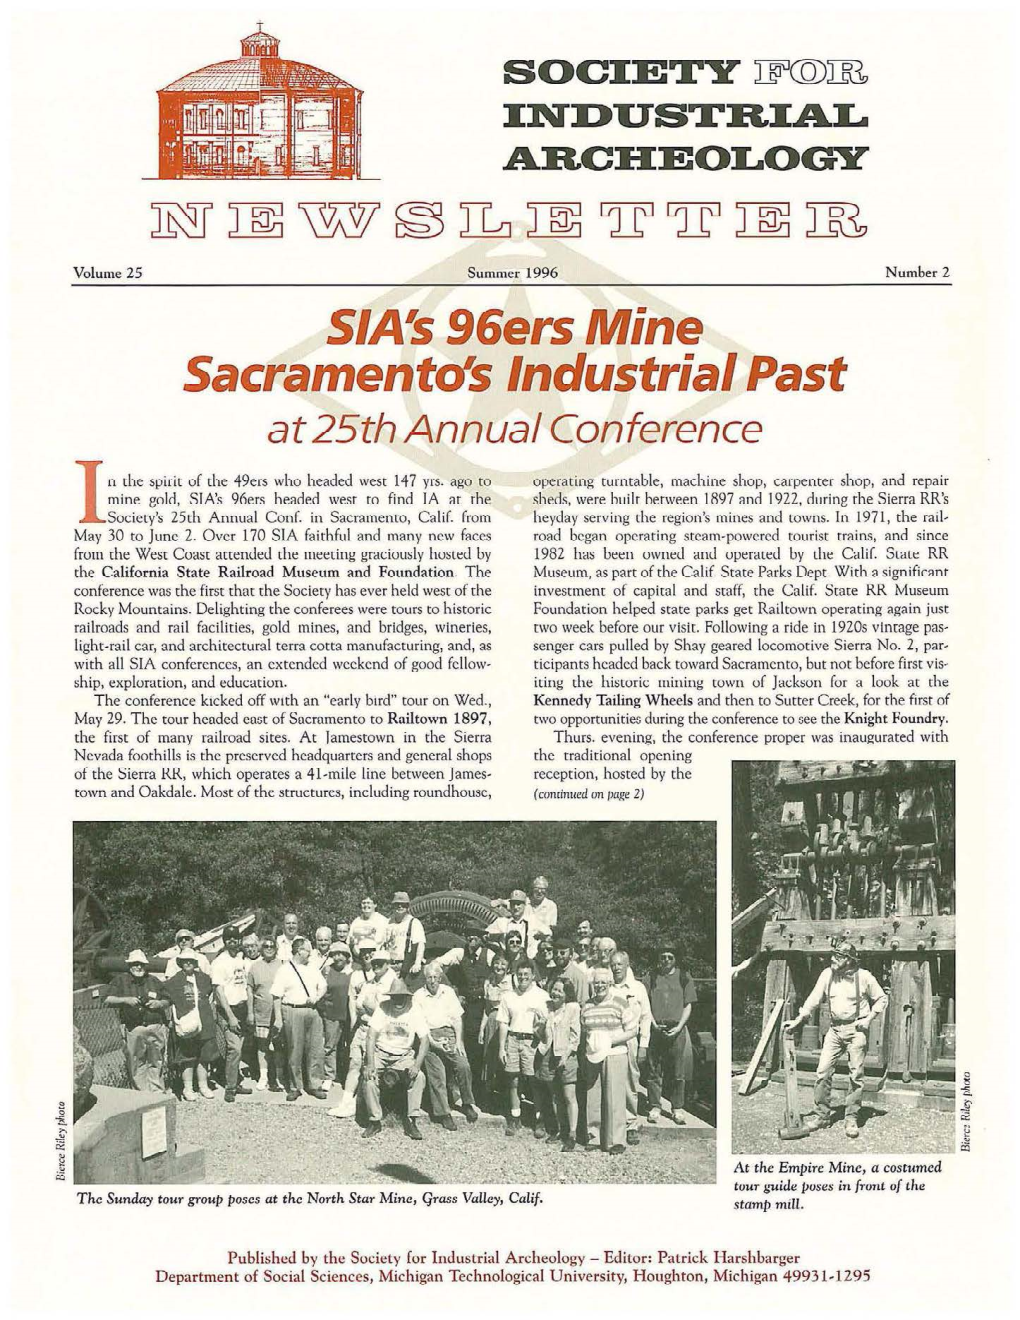 SIA's 96Ers Mine Sacramentds Industrial Past at 25Th Annual Conference